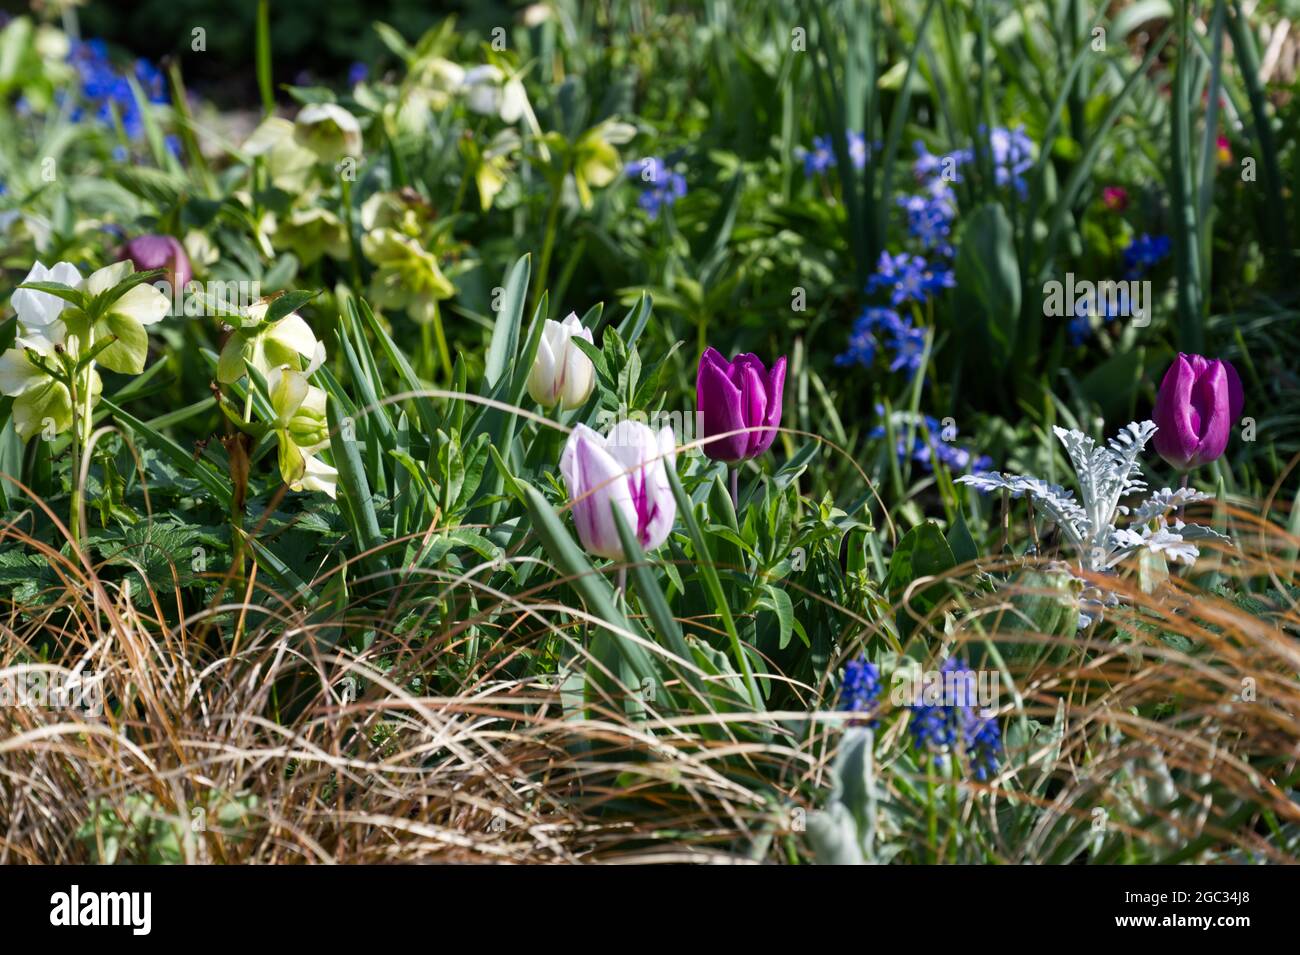 Purple and Flaming Flag tulips, hellebores and other spring flowers with bronze carex grass in a spring garden setting UK March Stock Photo